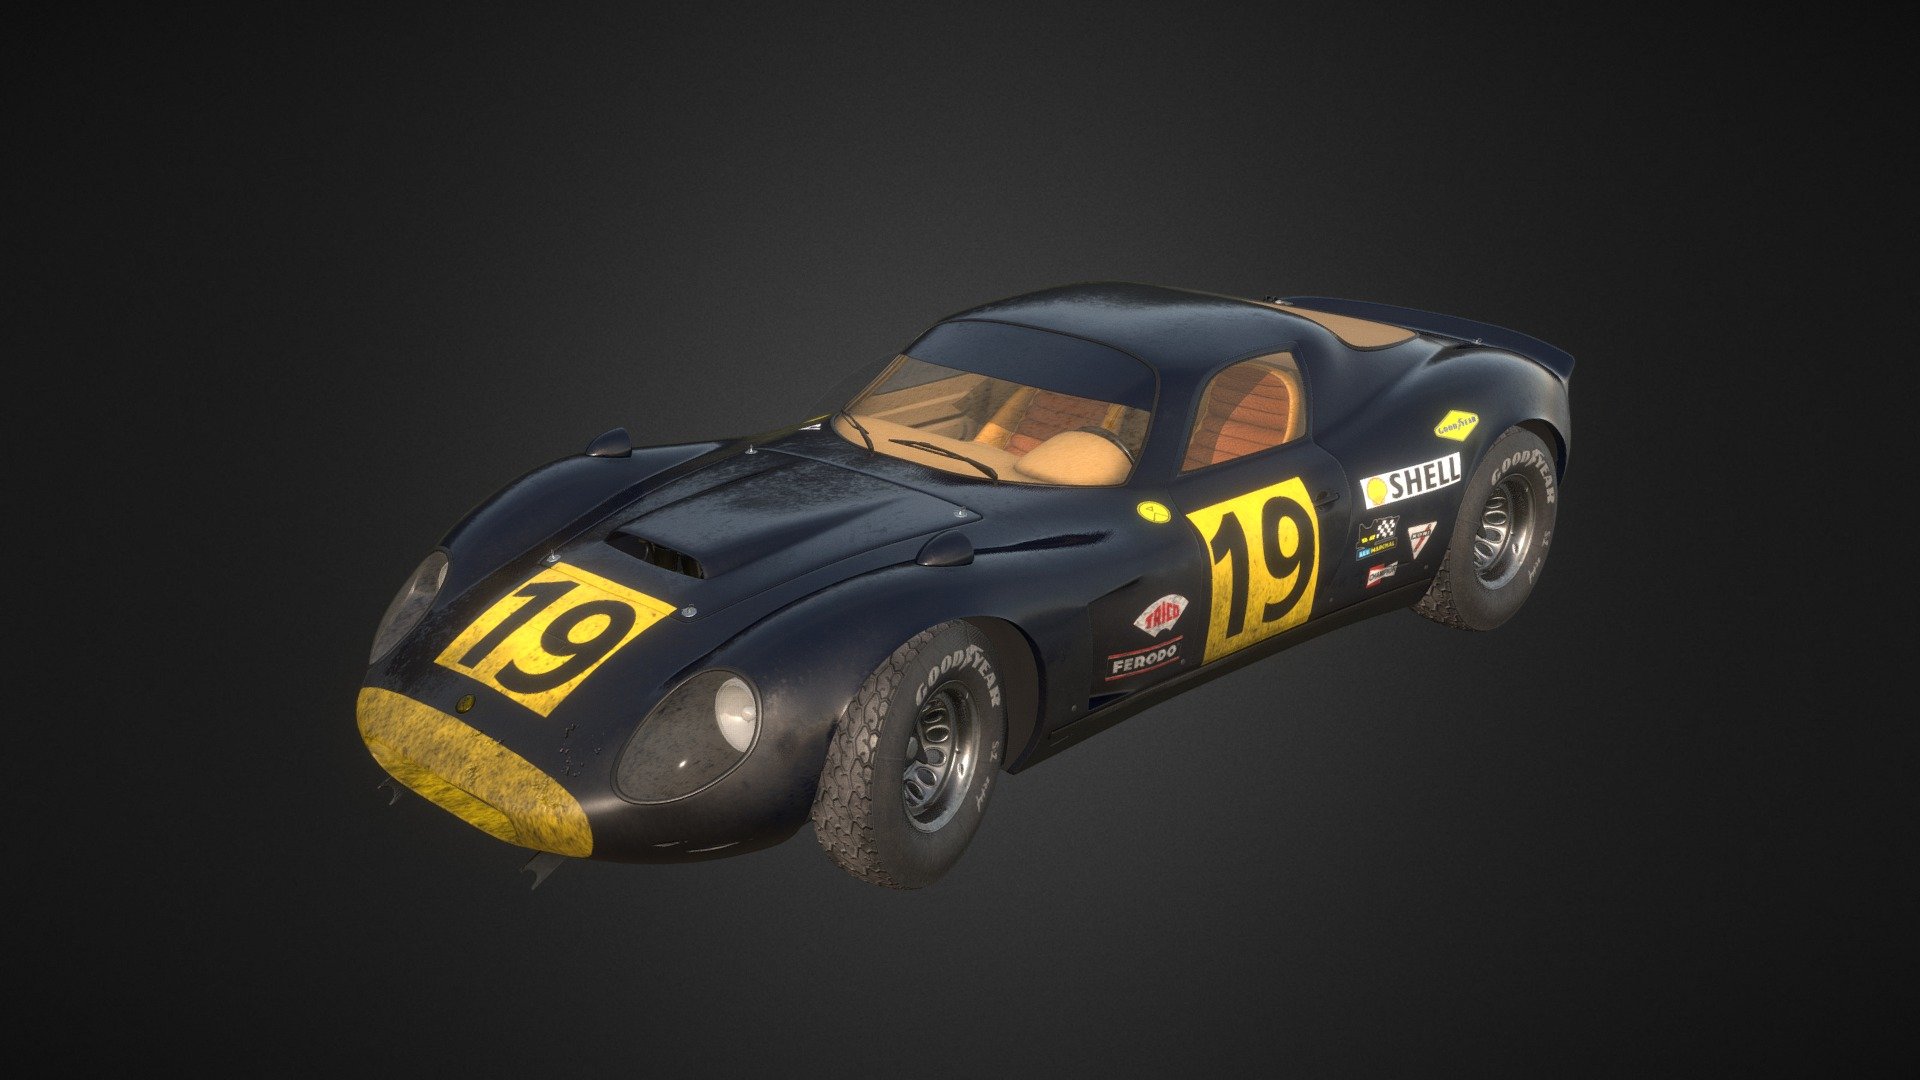 Stingray - Generic GT racing car based on designs from the 1960-1970s.

I used the Alfa Romeo Stradale 1967 as a base for this model.

I saved my self some time by reusing some of the assets like rims and interior pieces from this great model liked below:
https://sketchfab.com/3d-models/alfa-romeo-stradale-1967-fbb6adc7a6e84c3db6969e1debcd364b - Stingray - Generic Vintage GT Race car - 3D model by Todor Malakchiev (@todormalakchiev) 3d model